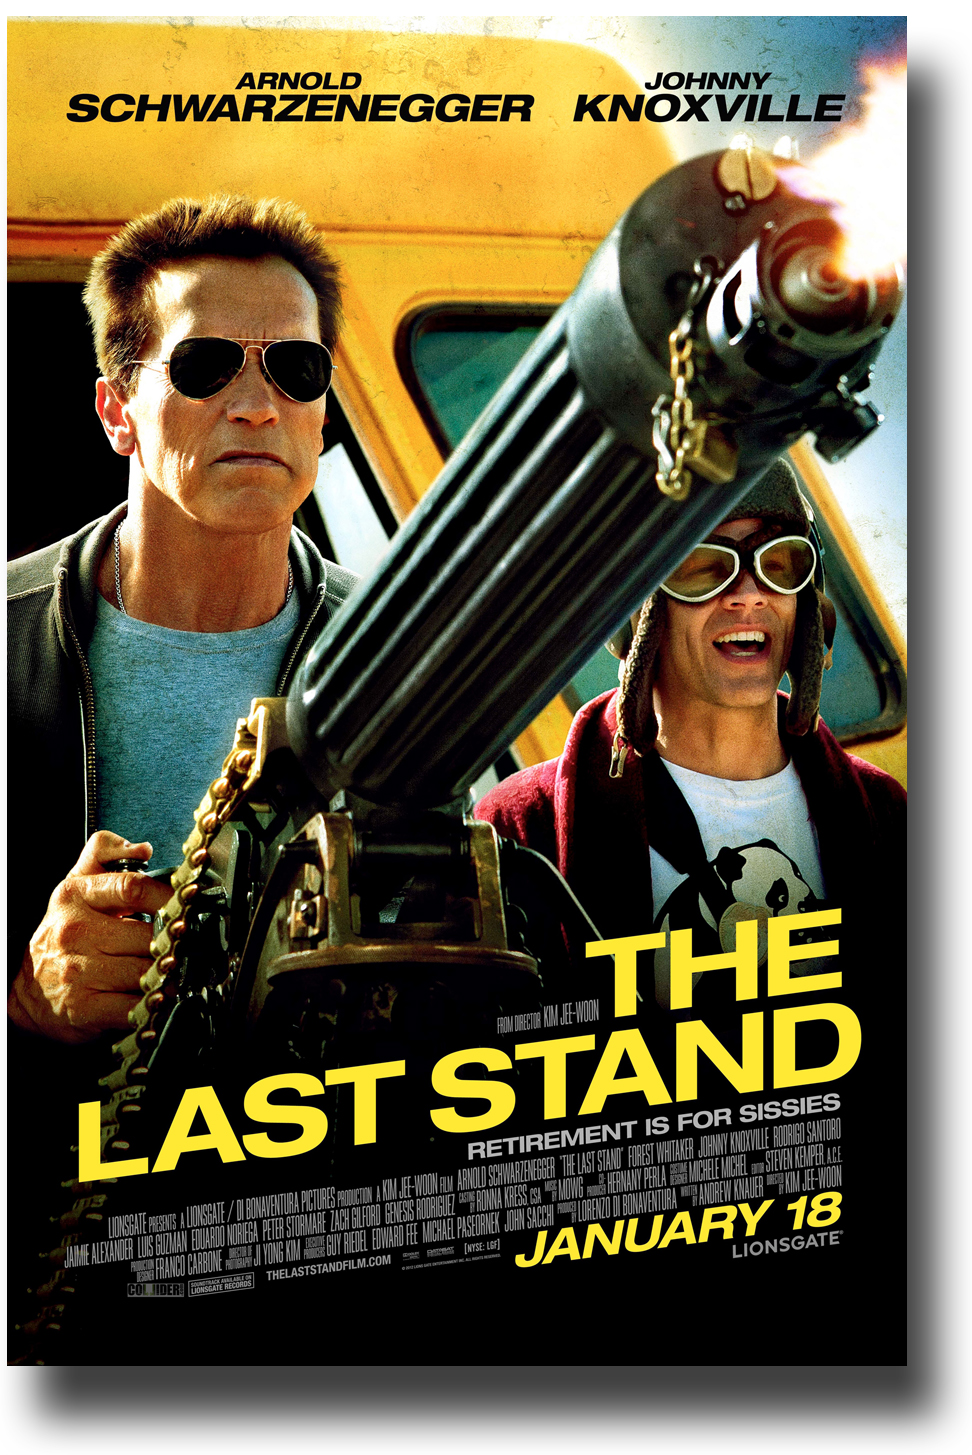 The Last Stand Backgrounds, Compatible - PC, Mobile, Gadgets| 972x1455 px